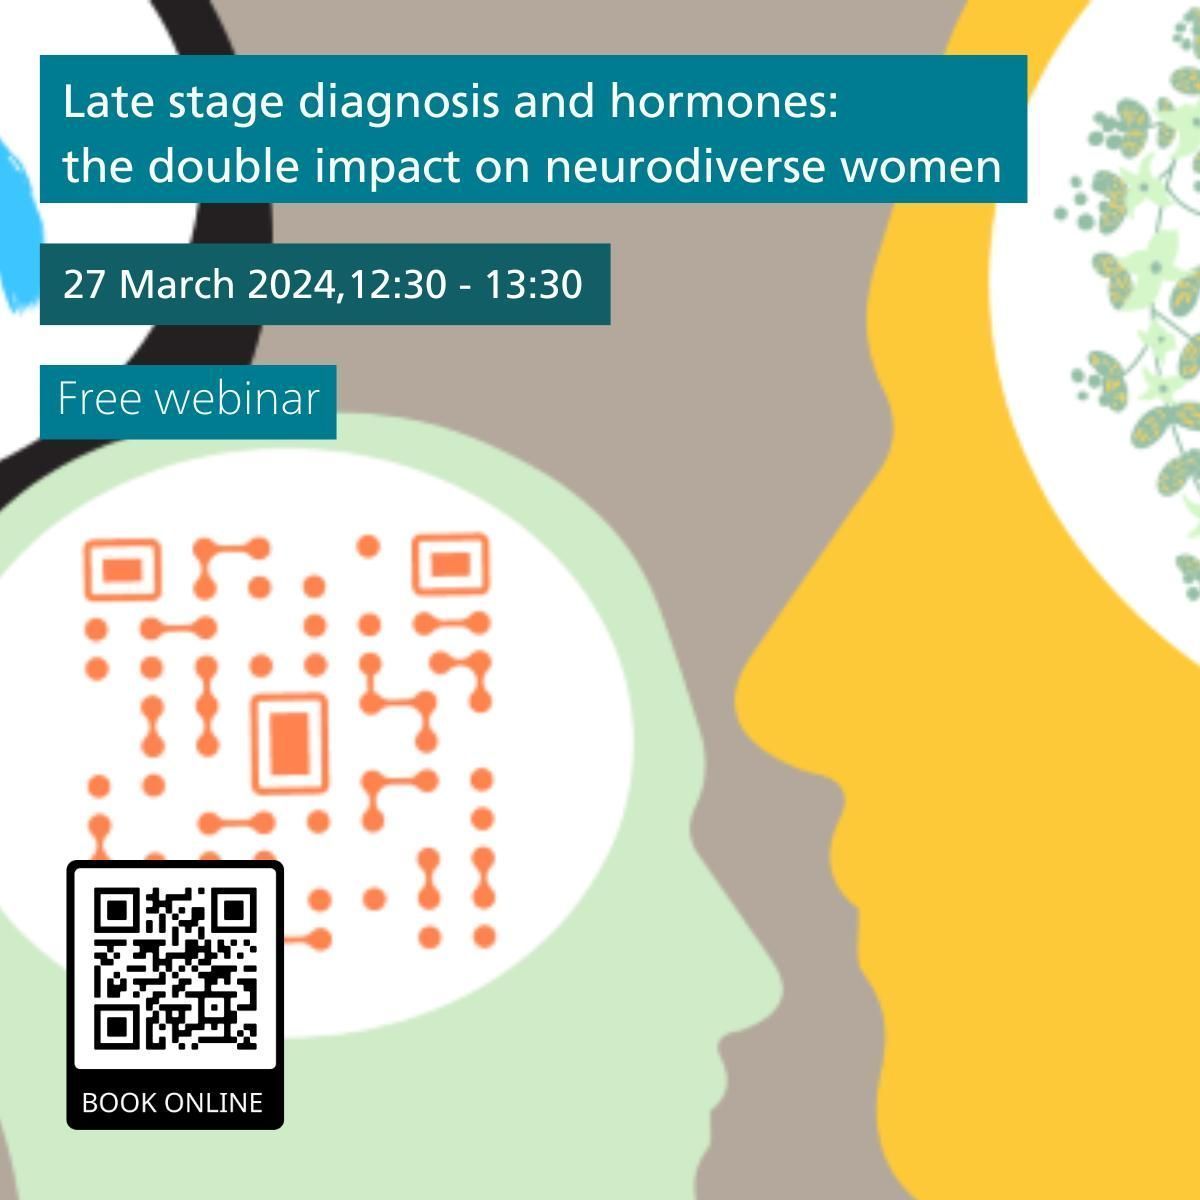 To mark #NeurodiversityCelebrationWeek, join a free webinar highlighting how #latediagnosis & #hormones are impacting #neurodiversewomen in the workplace. 

Louise Jones, #Neurodiversity Steering Committee Chair at WSP, will speaking.

Book⬇️ 
buff.ly/48Wmh8t

@NCWeek